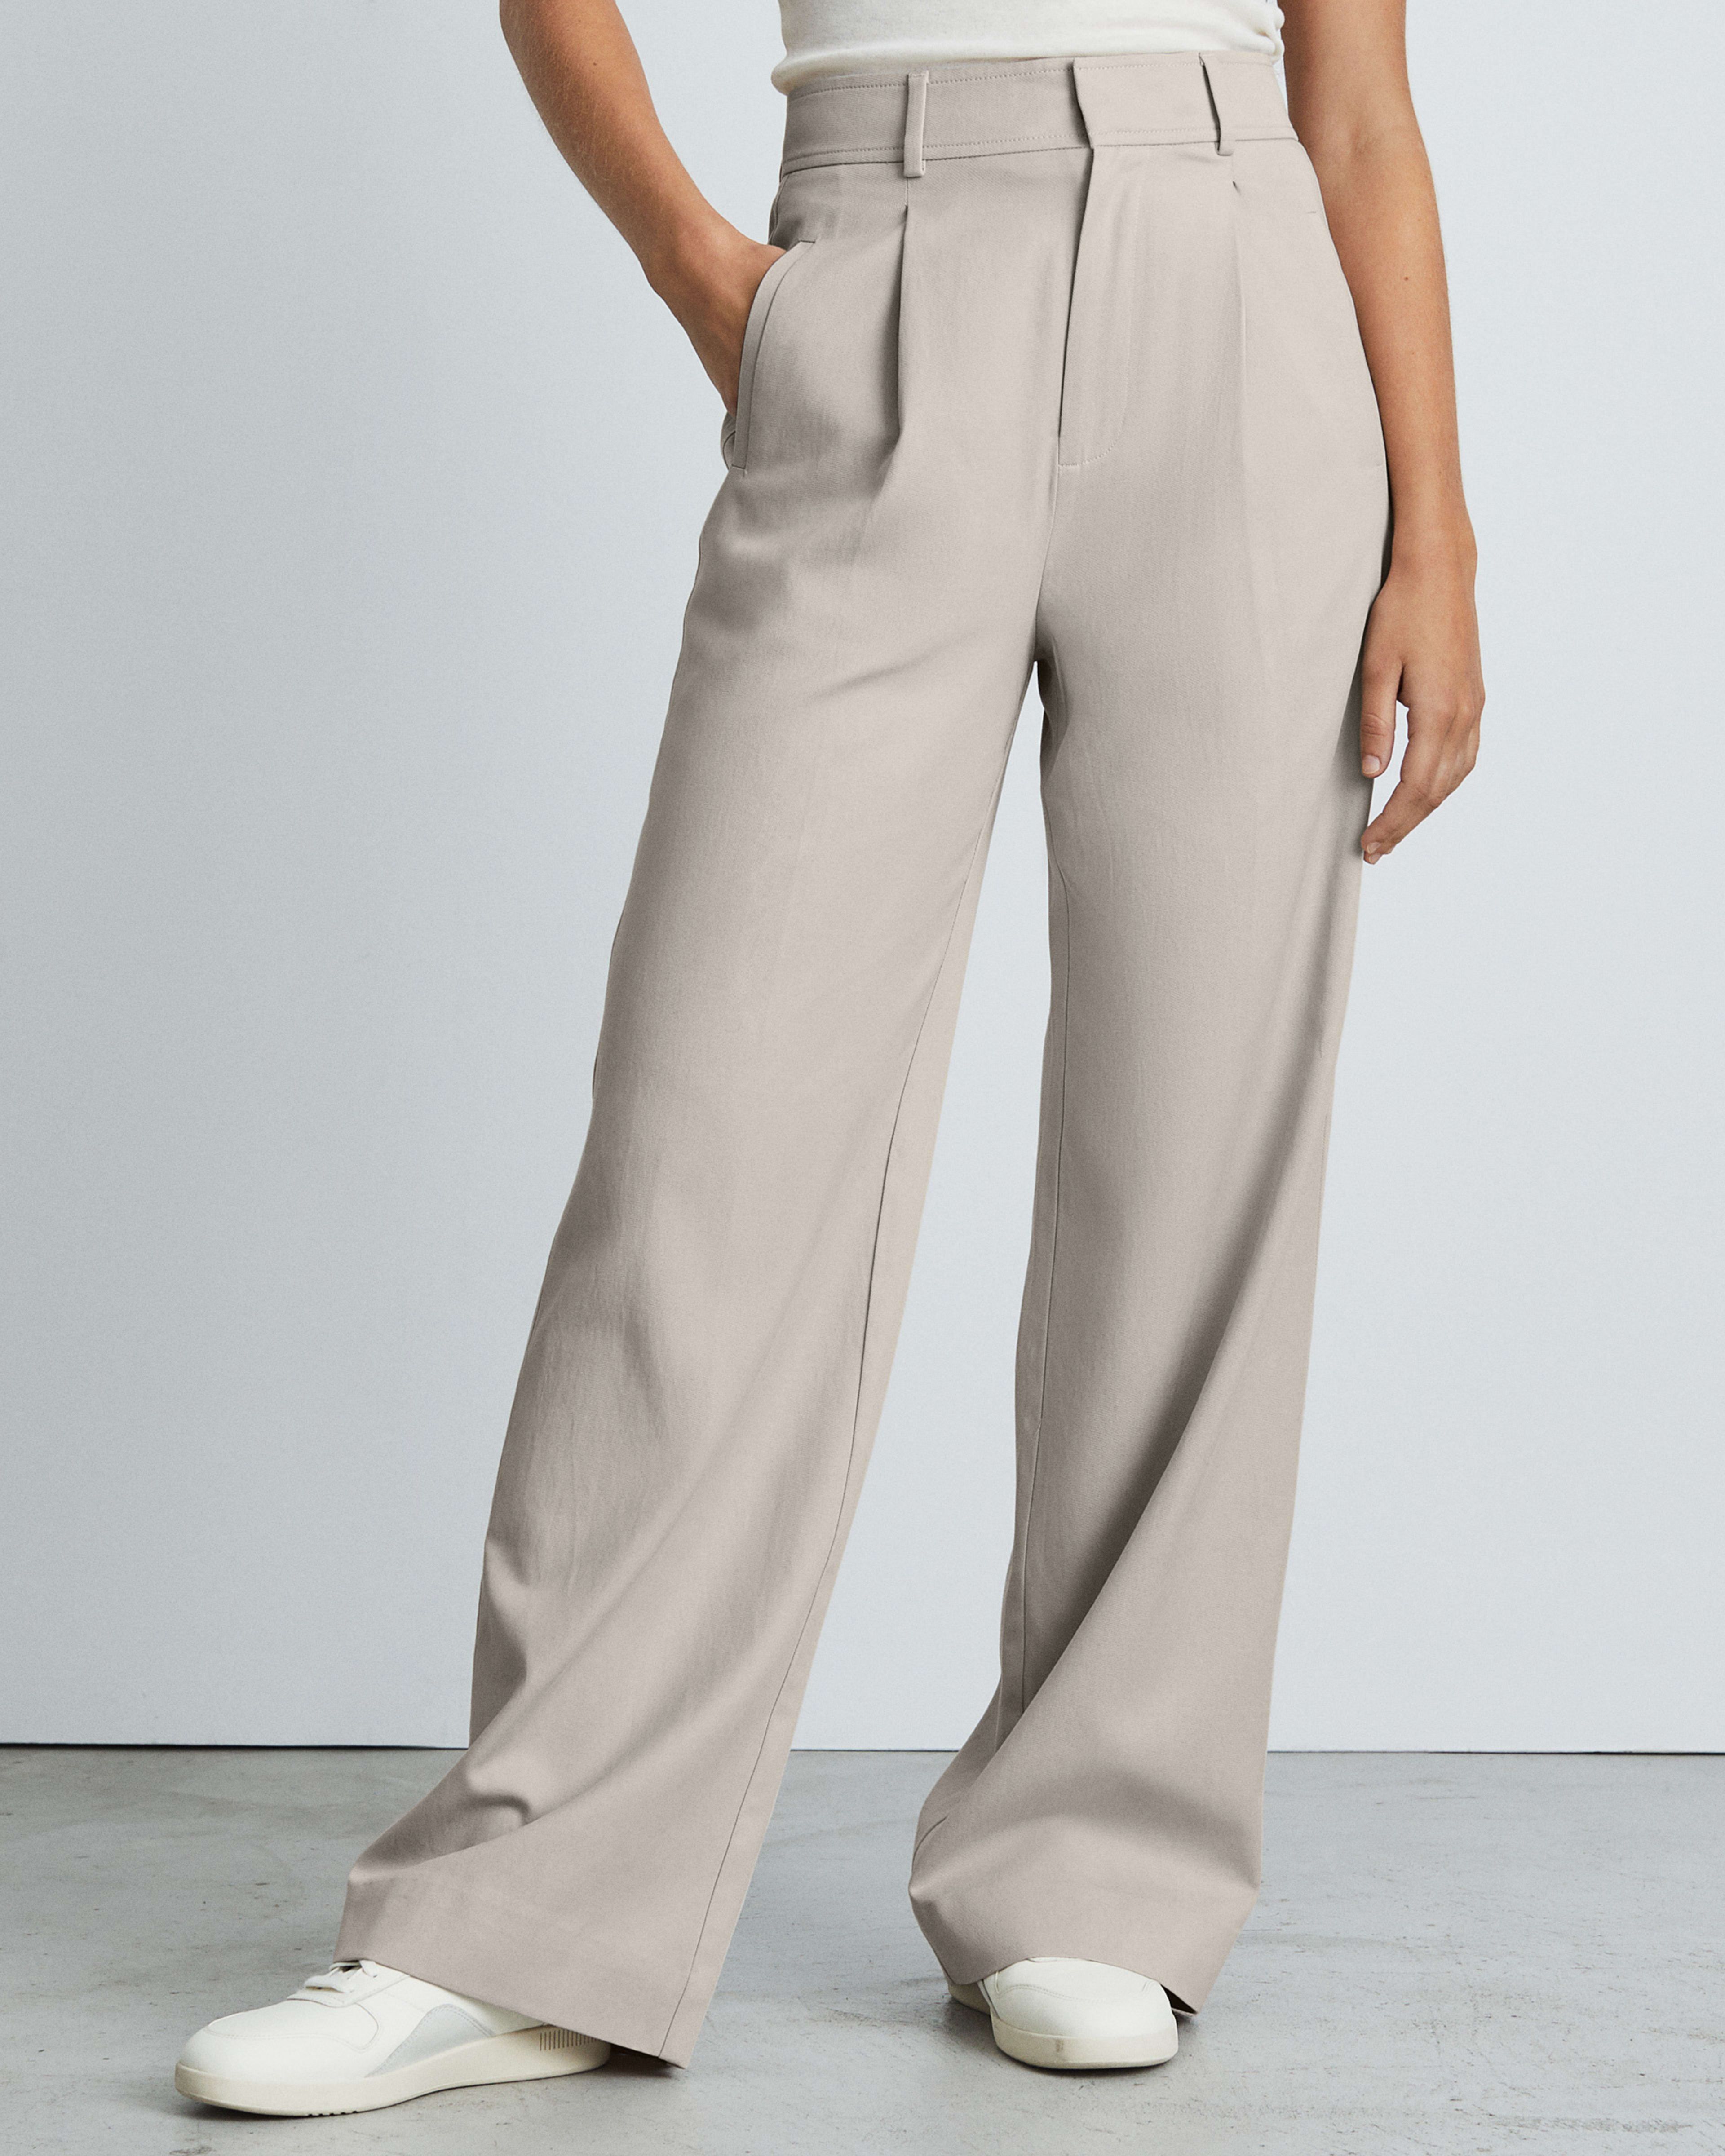 Buy online Zx3 Trouser Pant For Woman